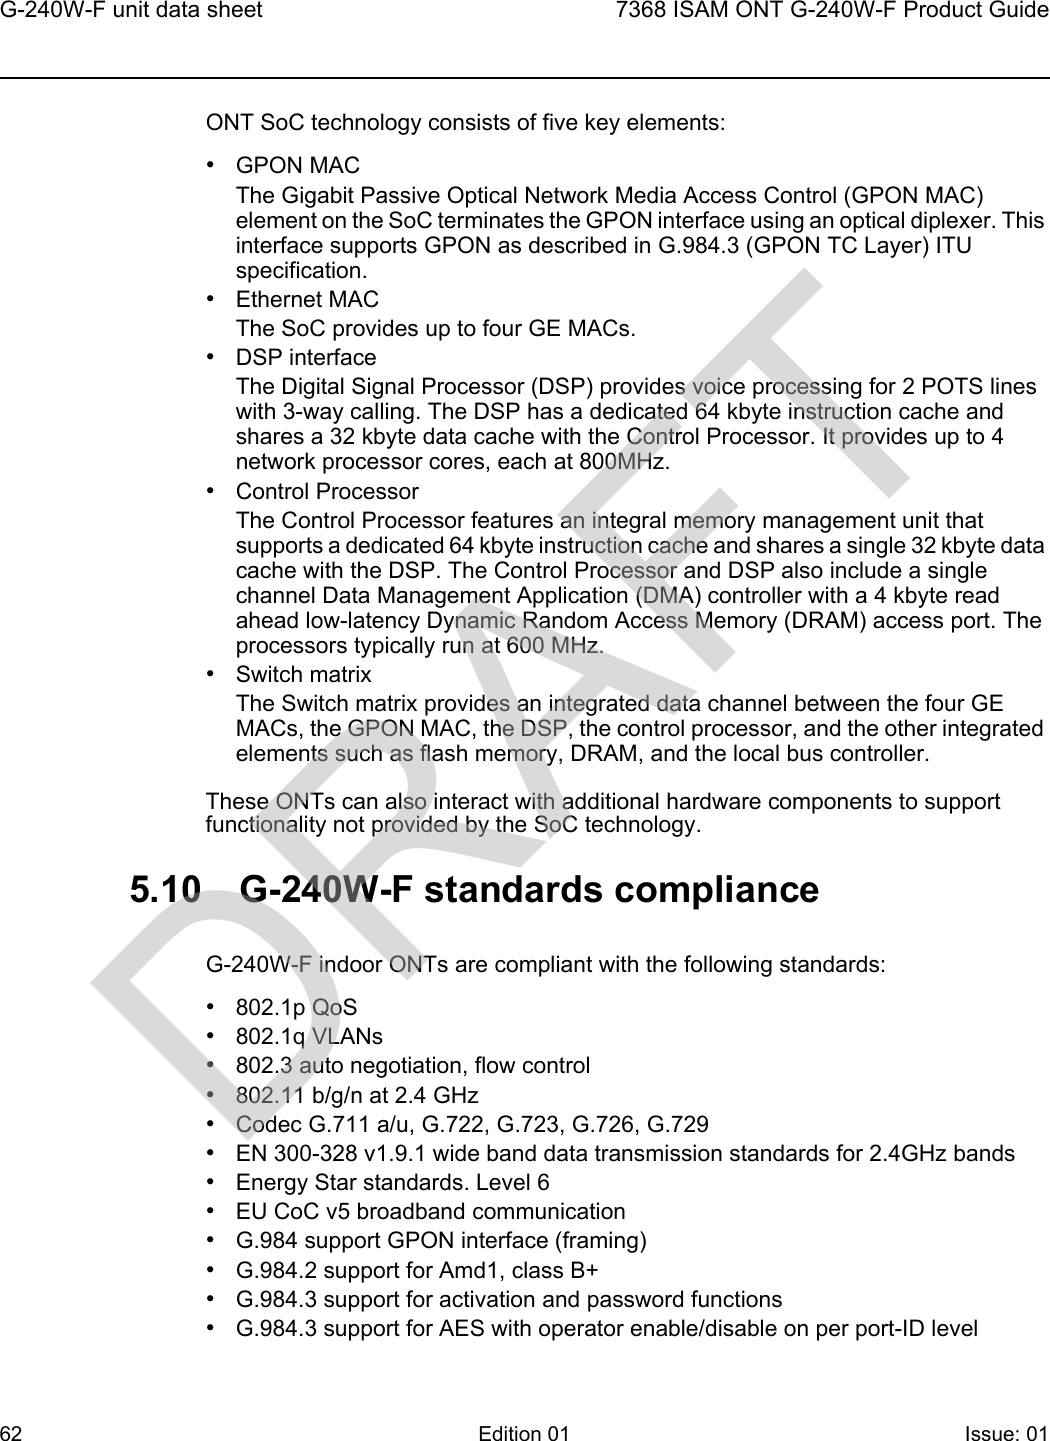 G-240W-F unit data sheet627368 ISAM ONT G-240W-F Product GuideEdition 01 Issue: 01 ONT SoC technology consists of five key elements:•GPON MACThe Gigabit Passive Optical Network Media Access Control (GPON MAC) element on the SoC terminates the GPON interface using an optical diplexer. This interface supports GPON as described in G.984.3 (GPON TC Layer) ITU specification. •Ethernet MACThe SoC provides up to four GE MACs.•DSP interfaceThe Digital Signal Processor (DSP) provides voice processing for 2 POTS lines with 3-way calling. The DSP has a dedicated 64 kbyte instruction cache and shares a 32 kbyte data cache with the Control Processor. It provides up to 4 network processor cores, each at 800MHz. •Control ProcessorThe Control Processor features an integral memory management unit that supports a dedicated 64 kbyte instruction cache and shares a single 32 kbyte data cache with the DSP. The Control Processor and DSP also include a single channel Data Management Application (DMA) controller with a 4 kbyte read ahead low-latency Dynamic Random Access Memory (DRAM) access port. The processors typically run at 600 MHz. •Switch matrixThe Switch matrix provides an integrated data channel between the four GE MACs, the GPON MAC, the DSP, the control processor, and the other integrated elements such as flash memory, DRAM, and the local bus controller.These ONTs can also interact with additional hardware components to support functionality not provided by the SoC technology.5.10 G-240W-F standards complianceG-240W-F indoor ONTs are compliant with the following standards:•802.1p QoS•802.1q VLANs•802.3 auto negotiation, flow control•802.11 b/g/n at 2.4 GHz•Codec G.711 a/u, G.722, G.723, G.726, G.729•EN 300-328 v1.9.1 wide band data transmission standards for 2.4GHz bands•Energy Star standards. Level 6•EU CoC v5 broadband communication•G.984 support GPON interface (framing)•G.984.2 support for Amd1, class B+•G.984.3 support for activation and password functions•G.984.3 support for AES with operator enable/disable on per port-ID levelDRAFT